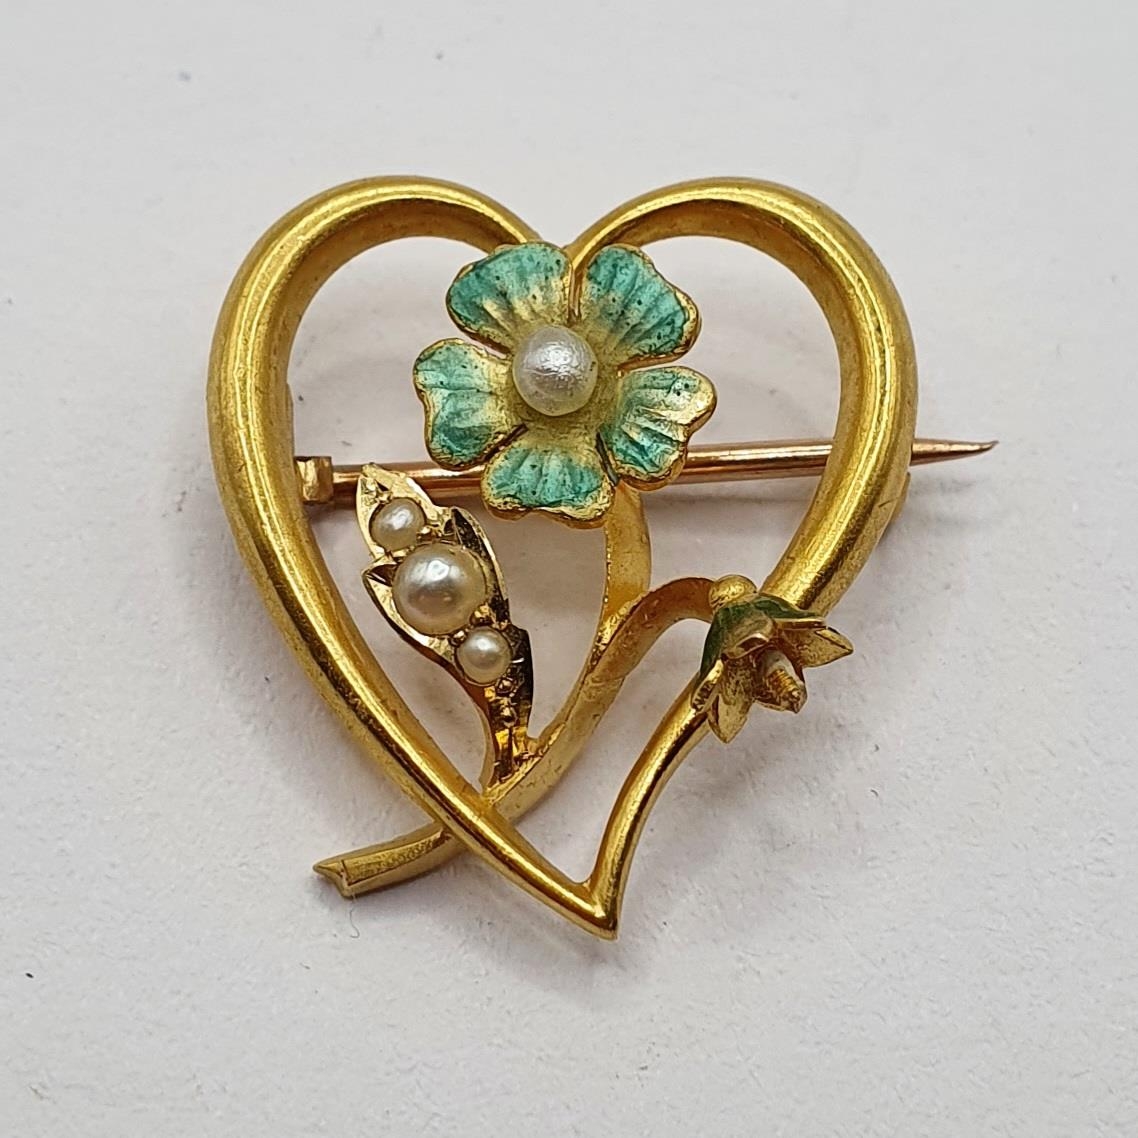 A 15ct gold, seed pearl and enamel heart shaped brooch, lacks a seed pearl, 2.4 g (all in)